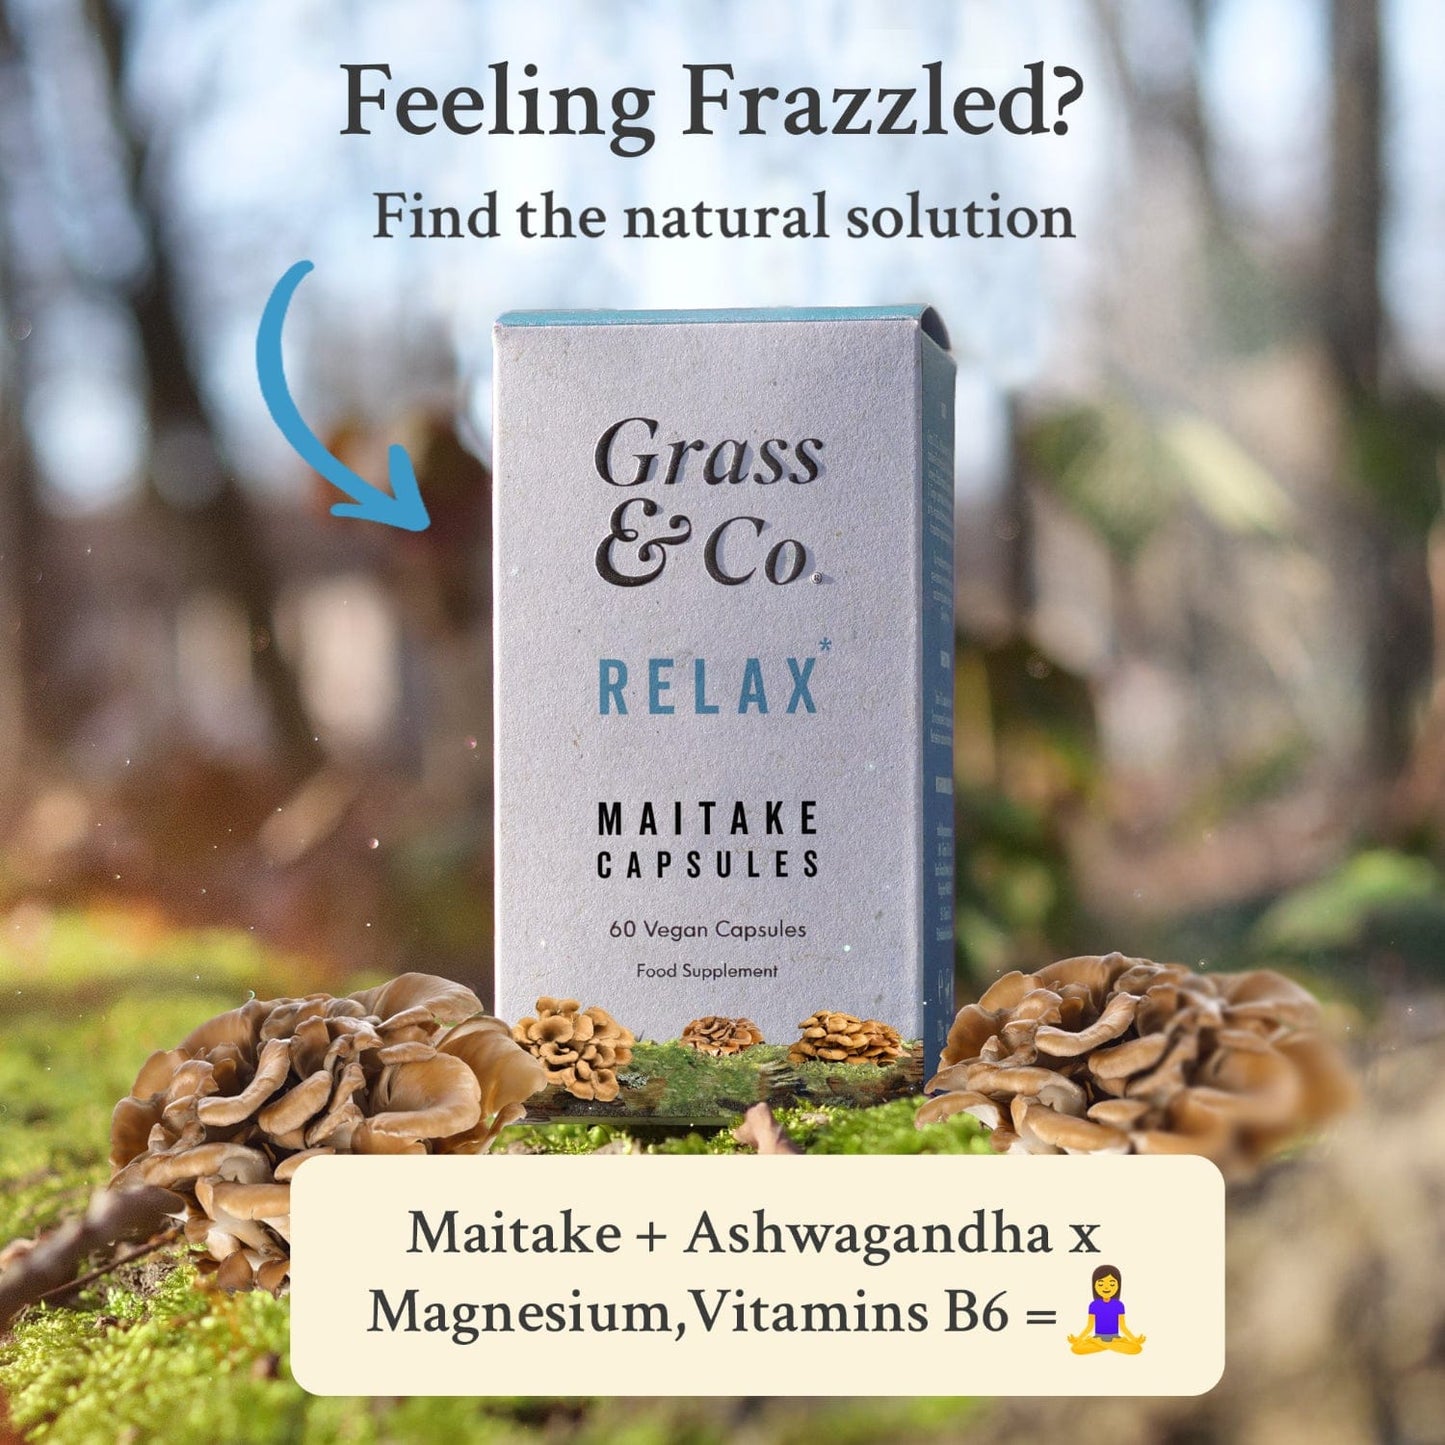 RELAX - Maitake Mushroom Supplement Capsules with Ashwagandha + Magnesium for Anxiety & Stress